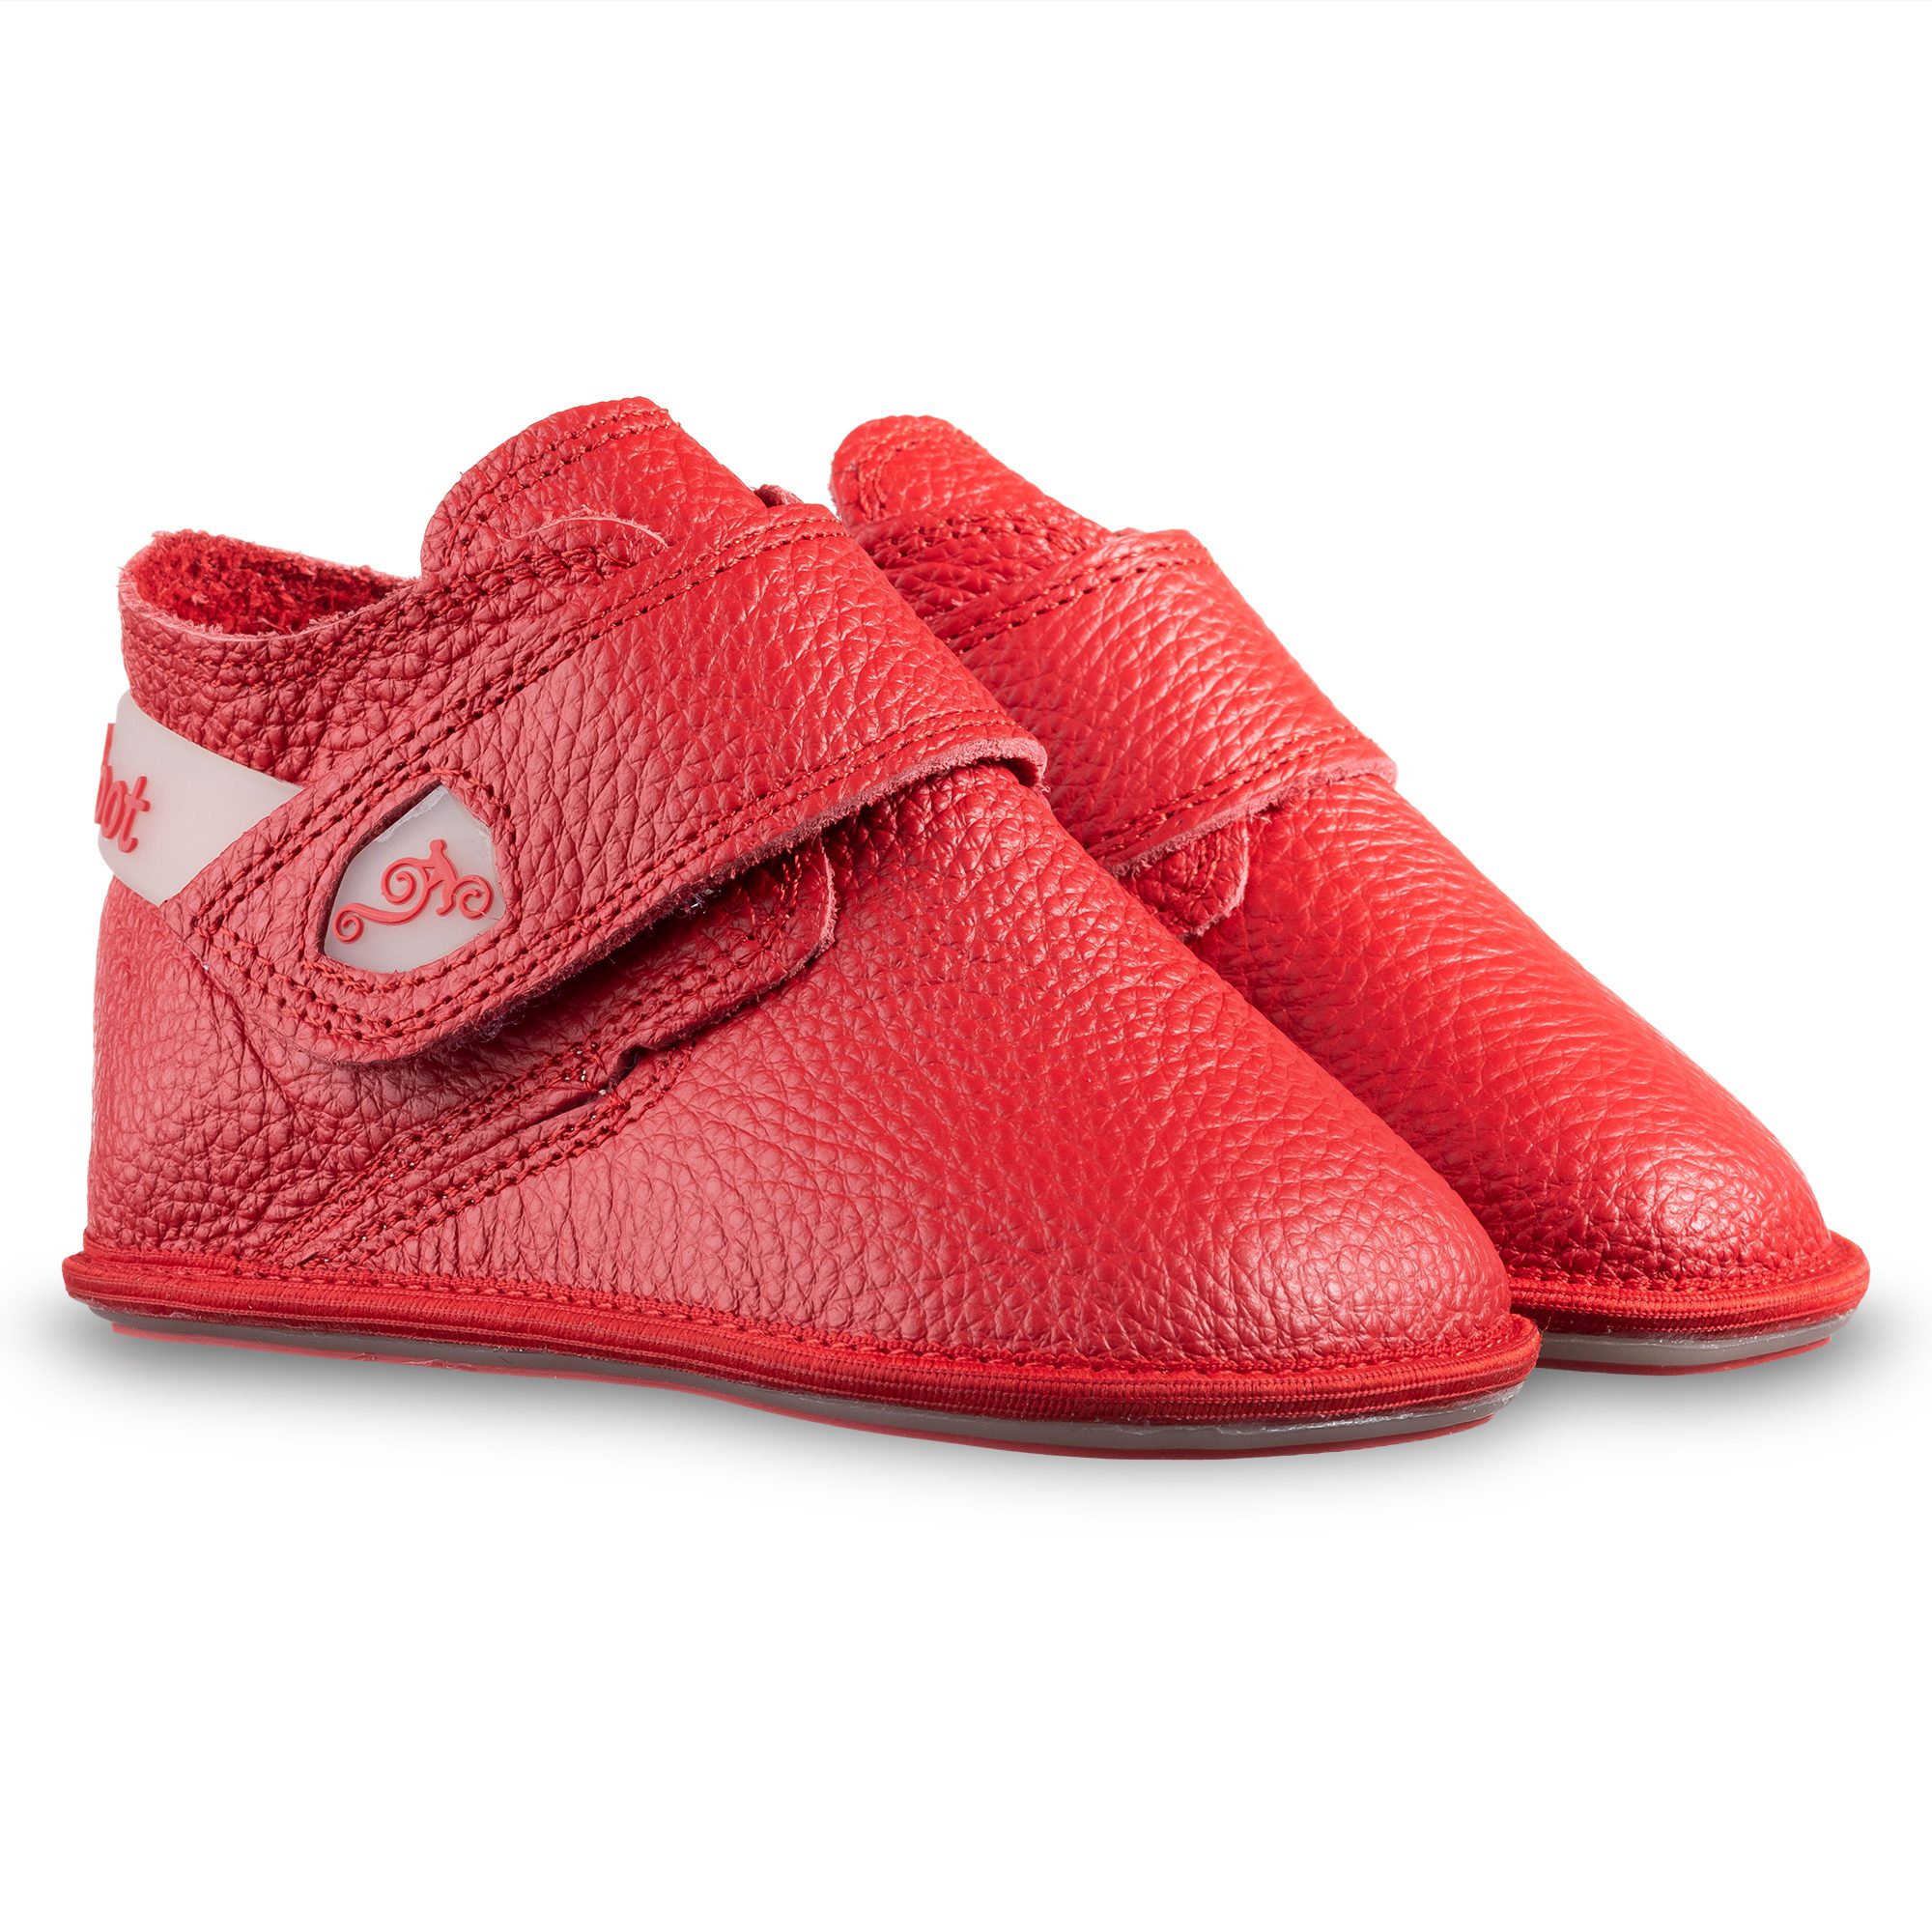 Discover more than 260 red baby sneakers